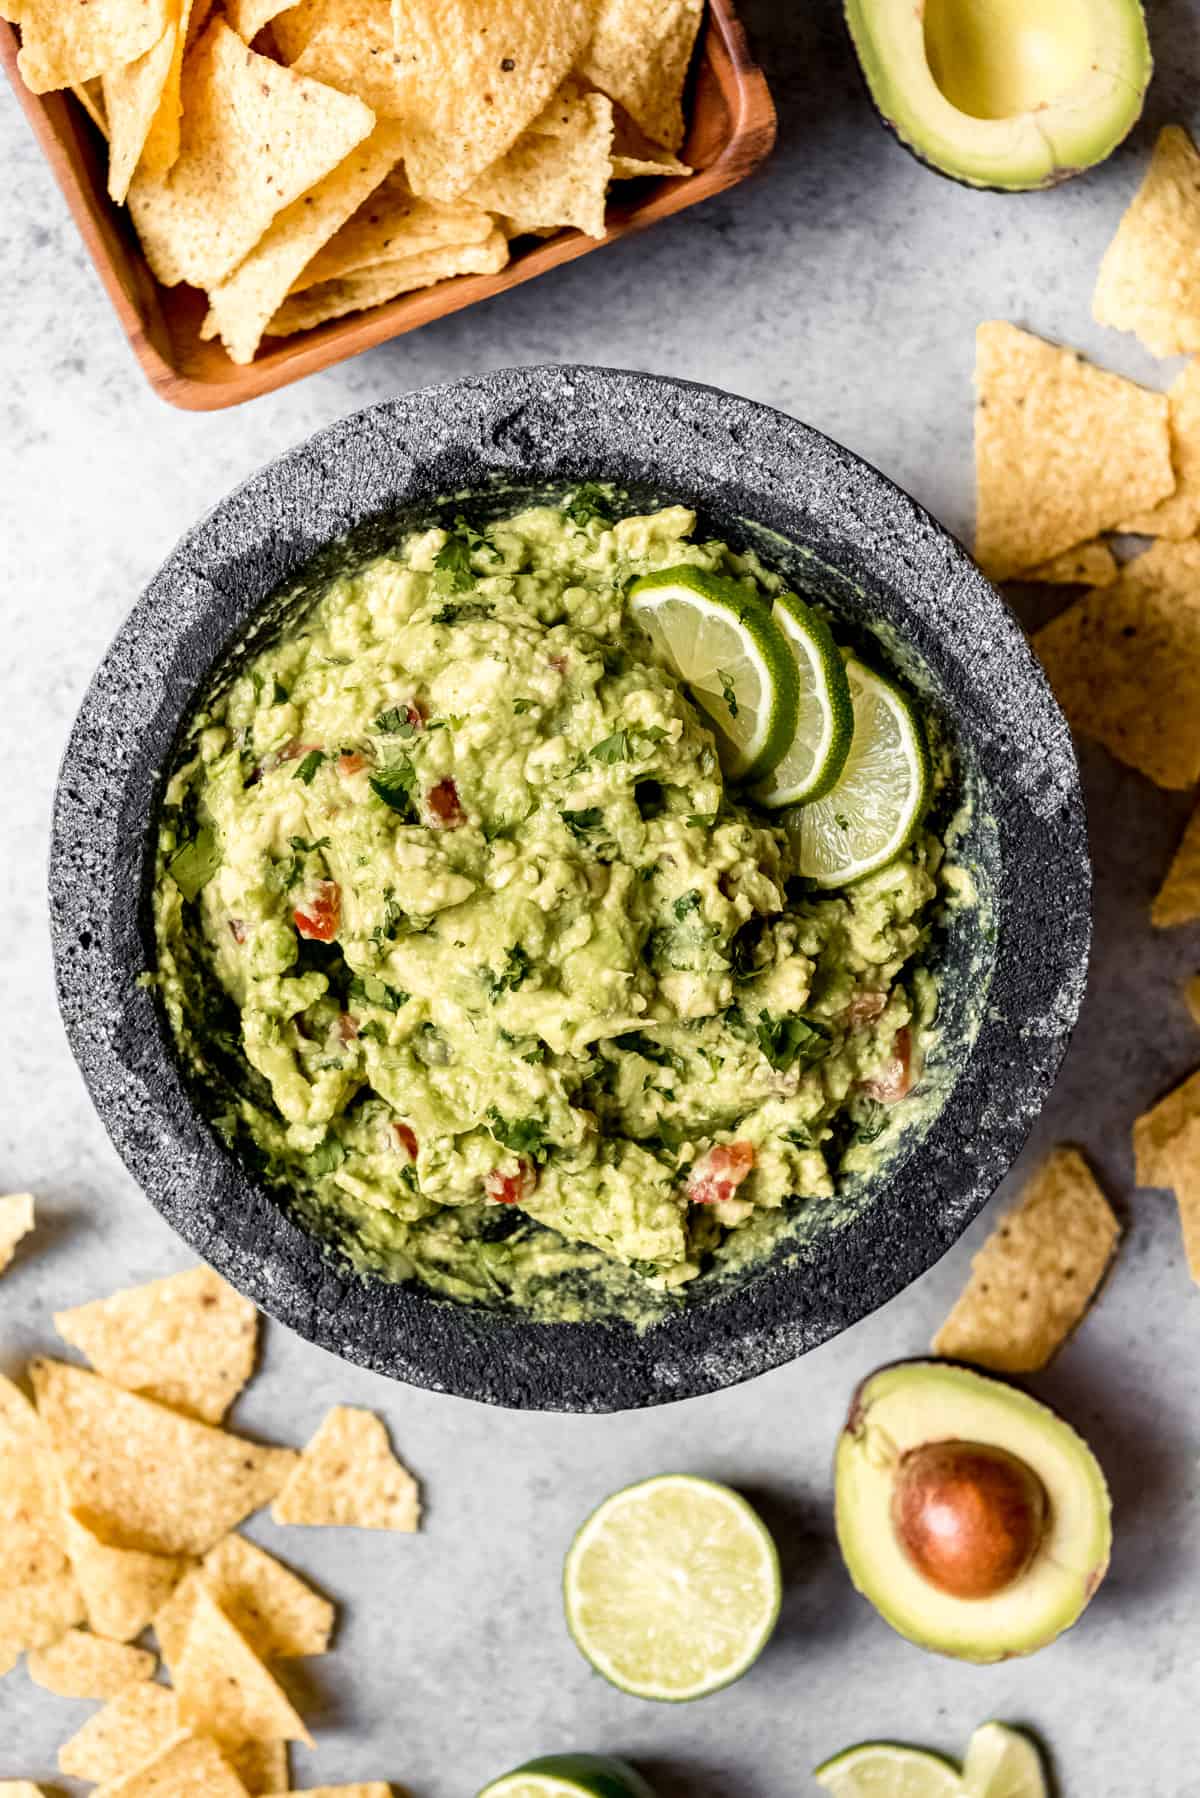 An image of a big bowl of guacamole garnished with sliced limes.